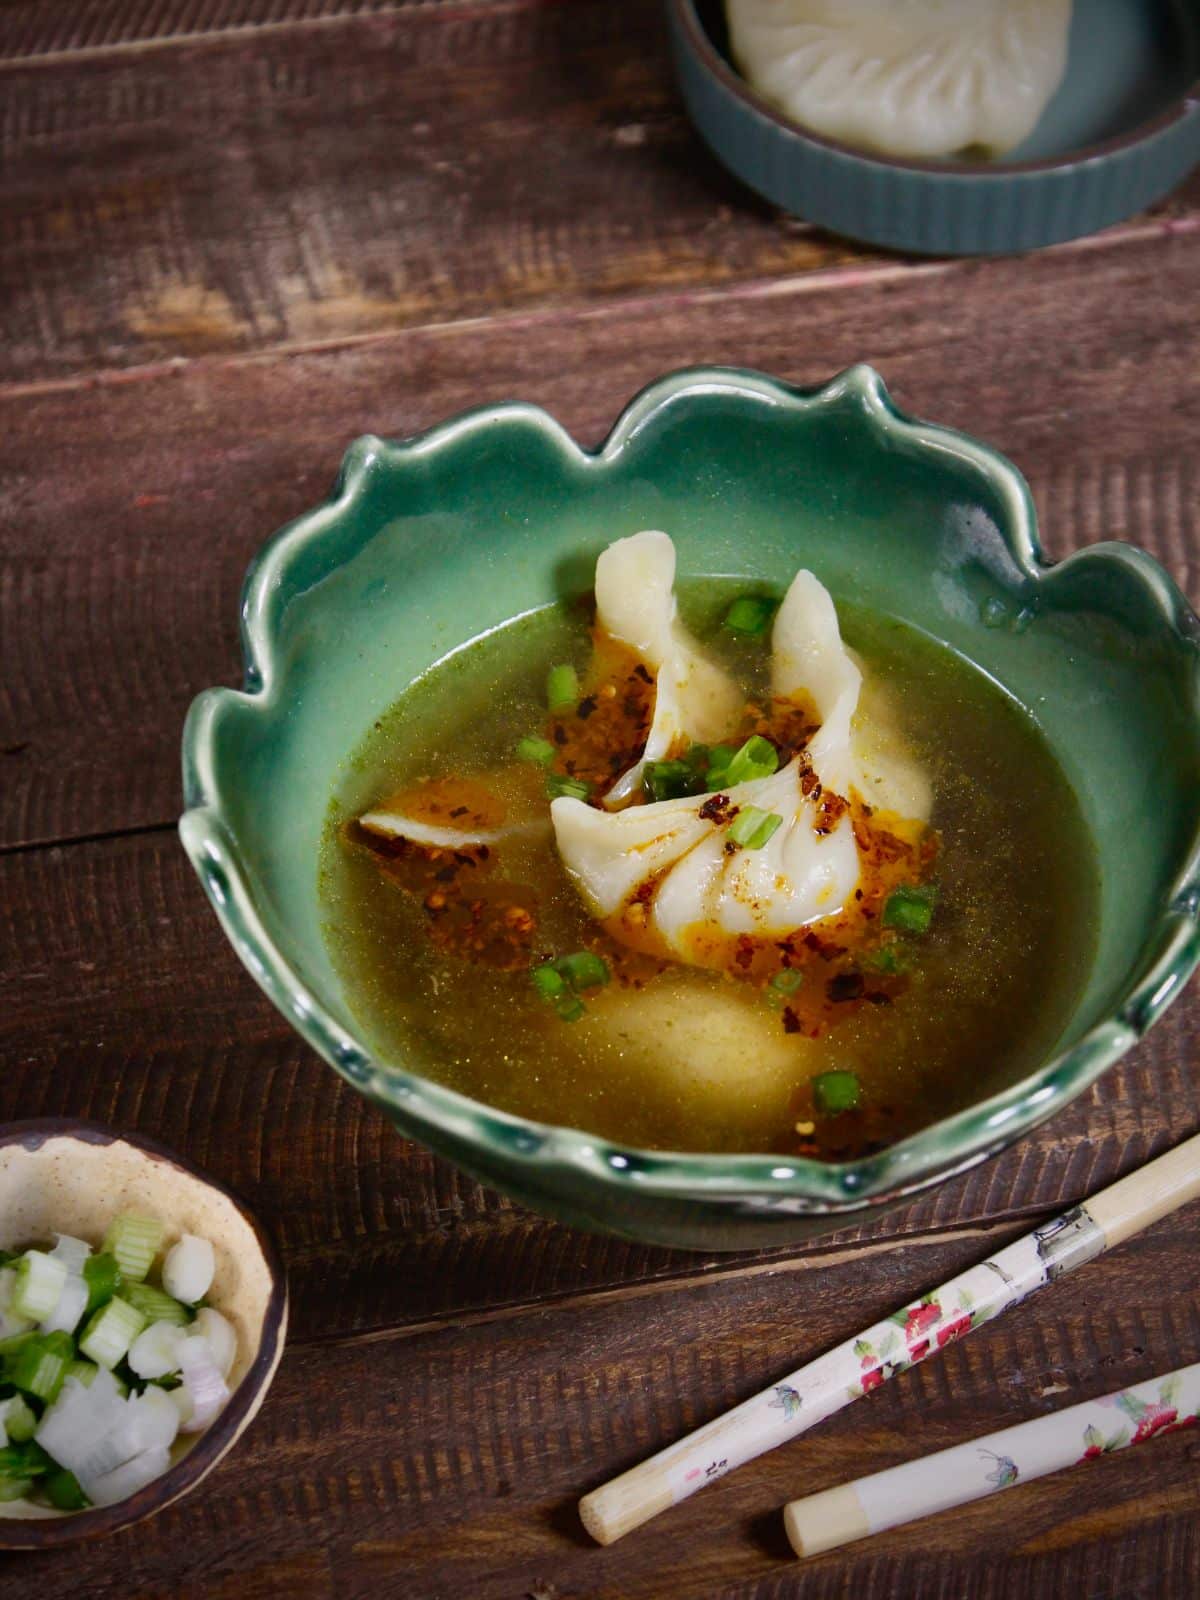 Spicy dumplings with warm broth